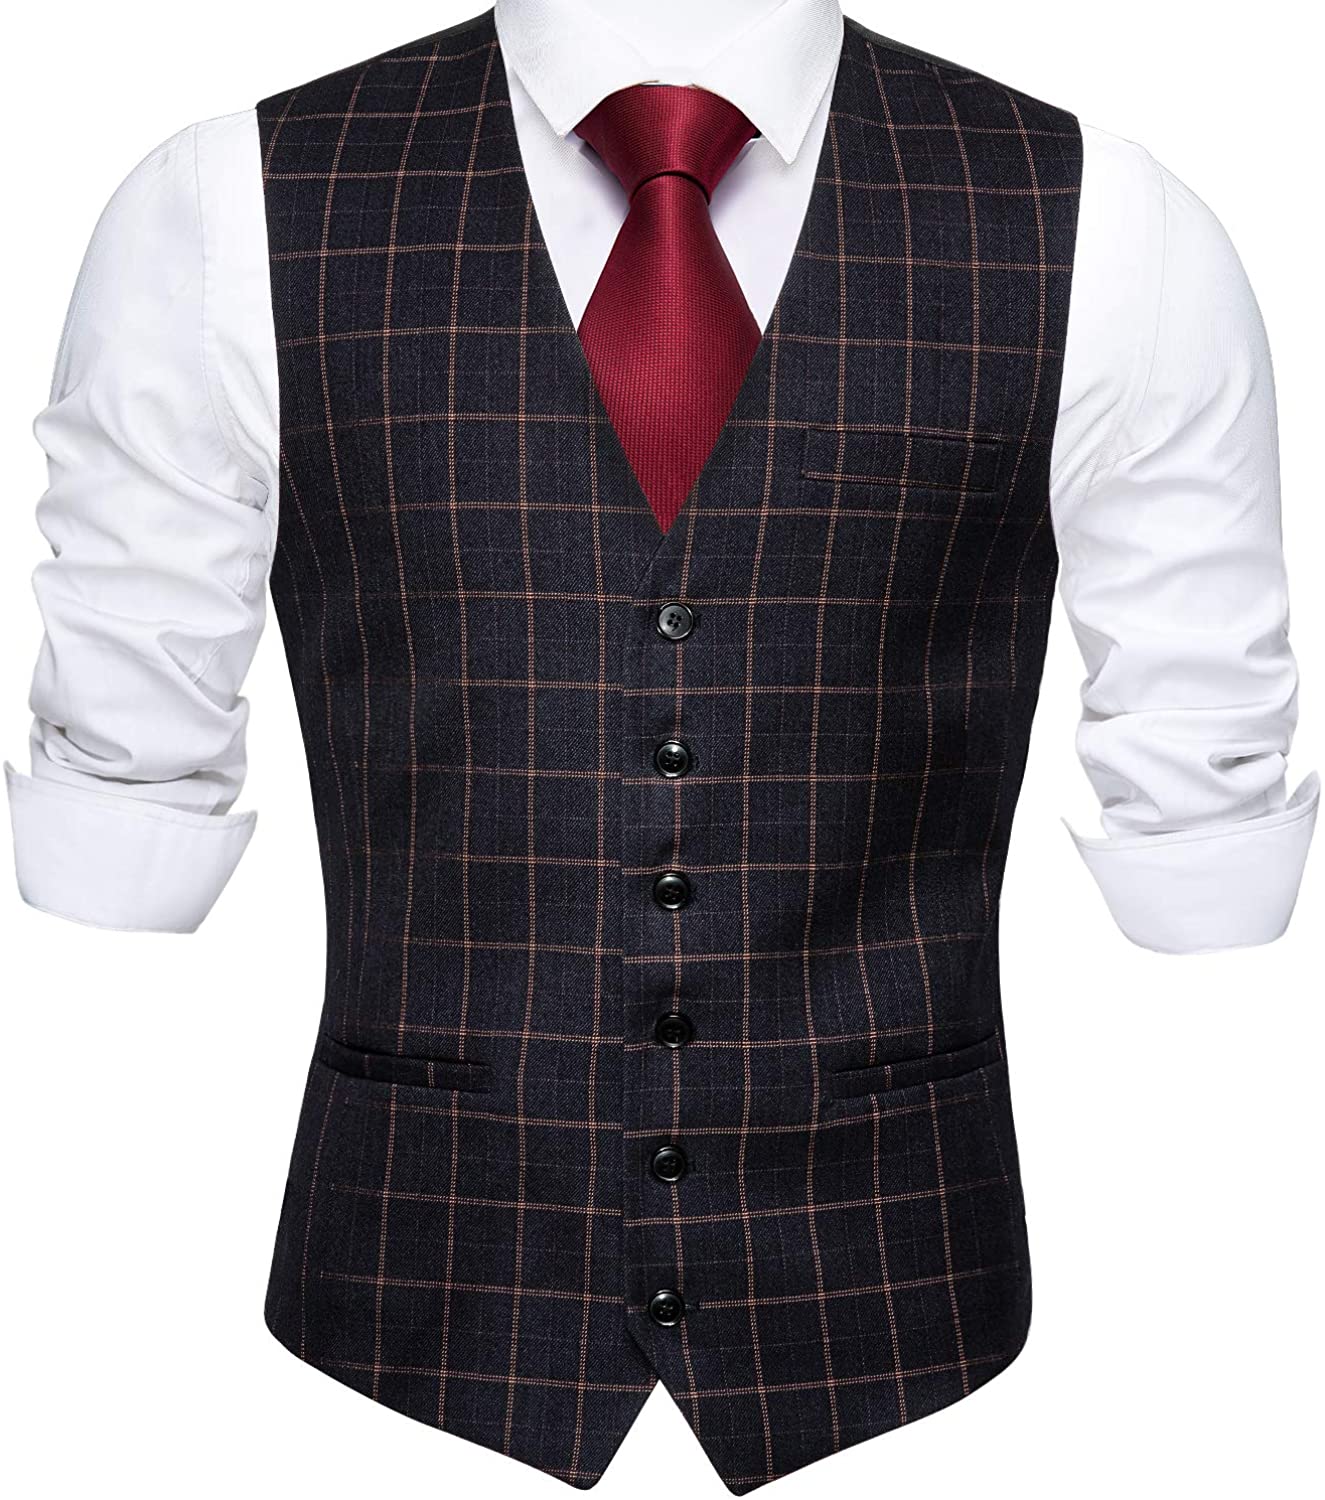 Barry.Wang Mens Plaid Waistcoat Wool Blend Tailored Collar/V-neck 3 Pocket Check Vest Formal/Leisure 